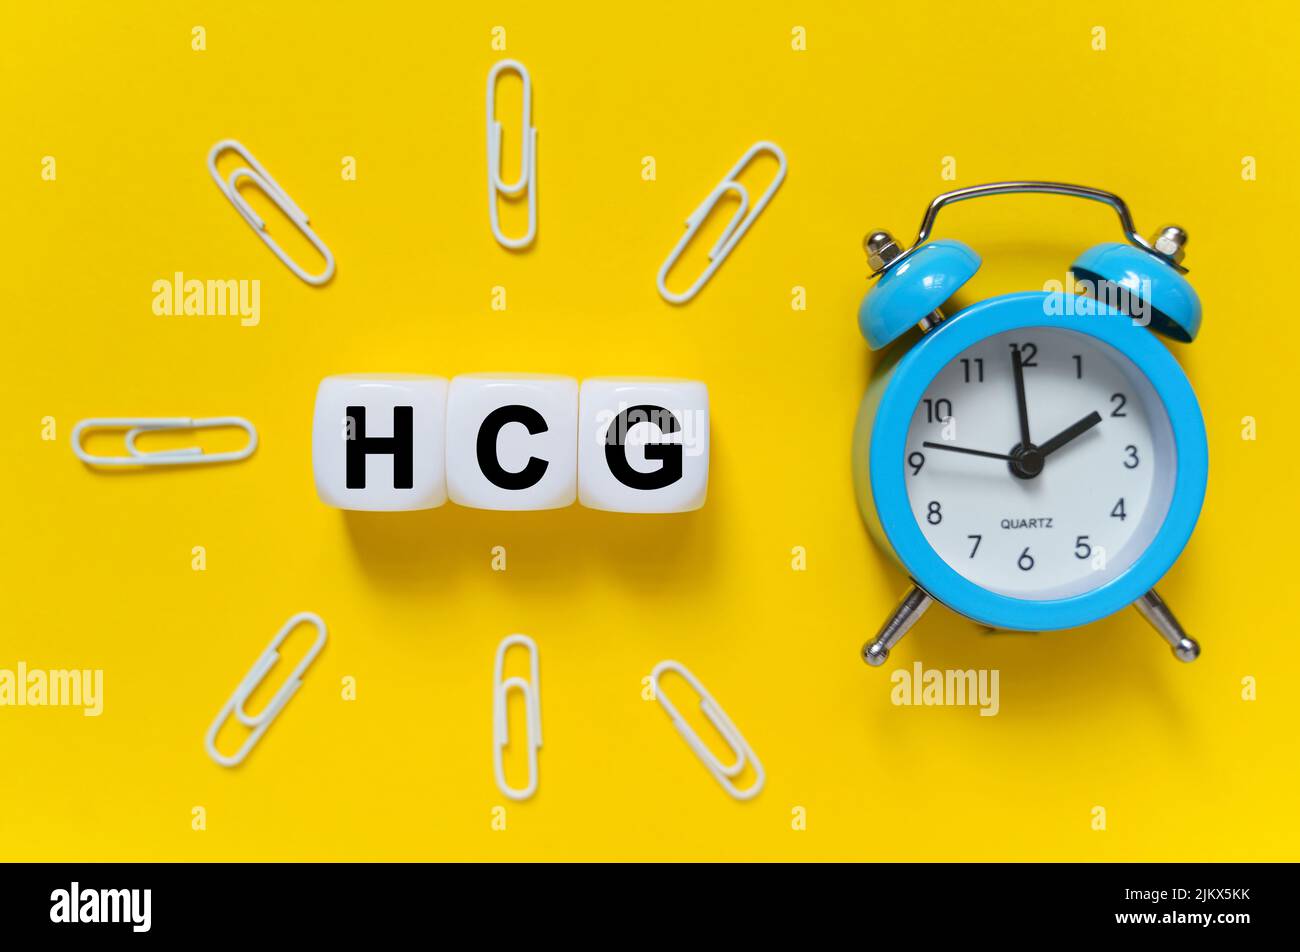 Finance and economics concept. On a yellow background, a blue alarm clock, paper clips and white cubes on which the text is written - HCG Stock Photo